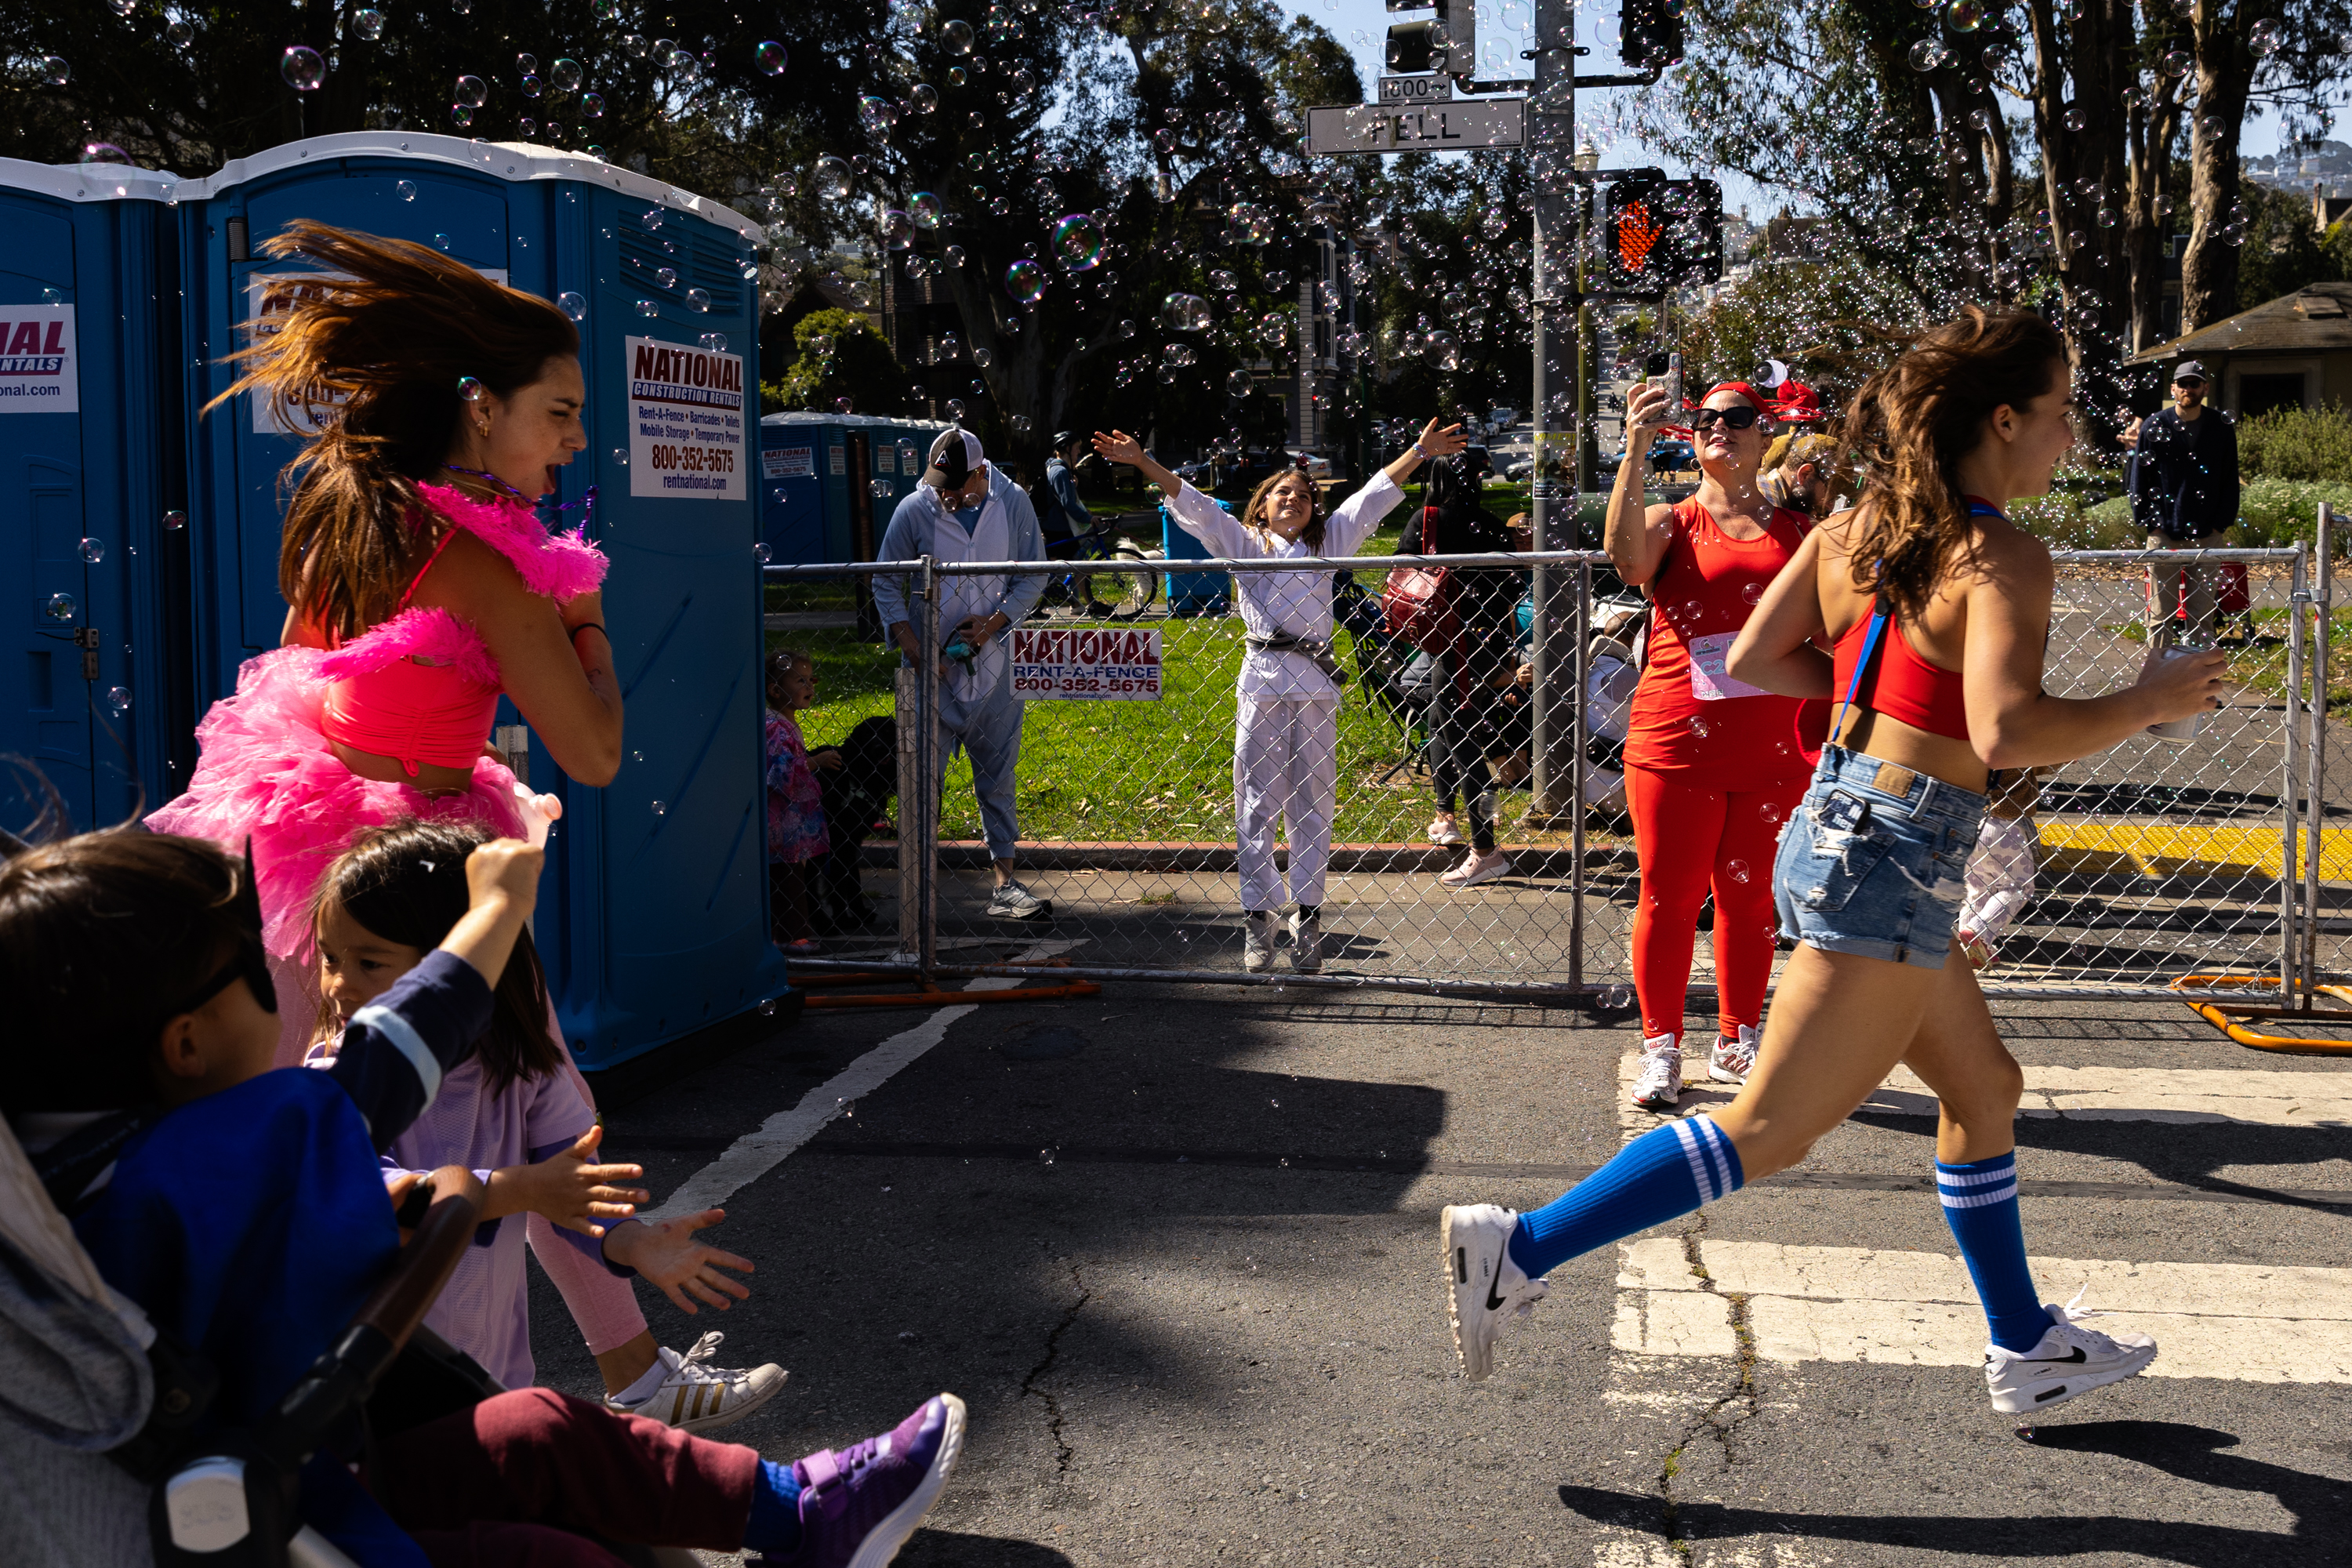 A lively street scene with people dressed in colorful, festive outfits, including a woman in pink, running and generating bubbles, with spectators, including children, enjoying the scene.